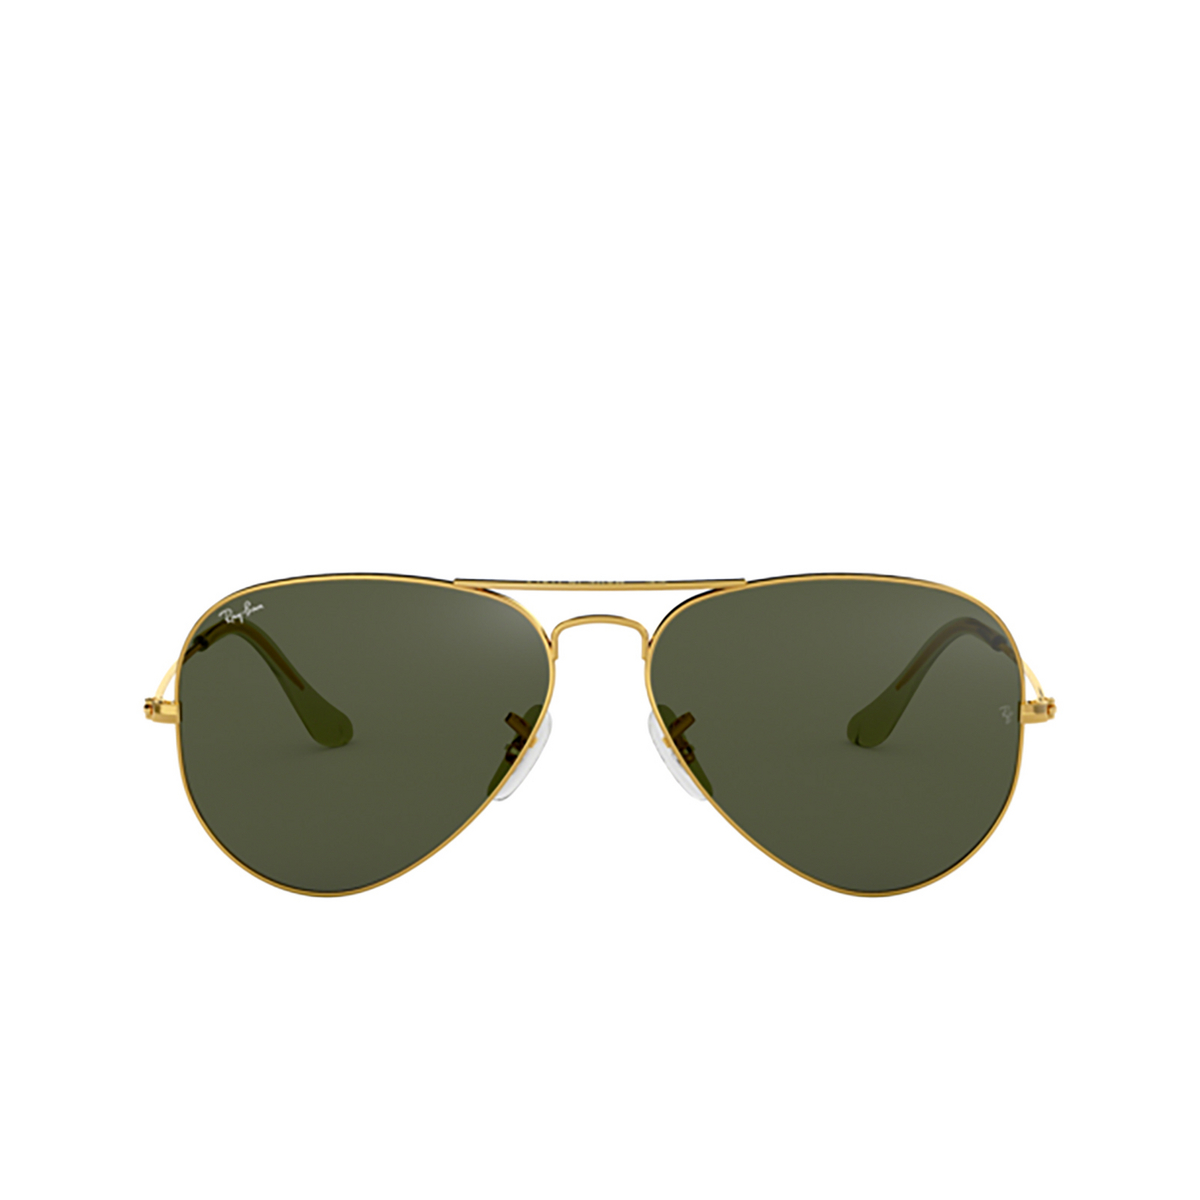 Ray-Ban AVIATOR LARGE METAL Sunglasses L0205 ARISTA - front view